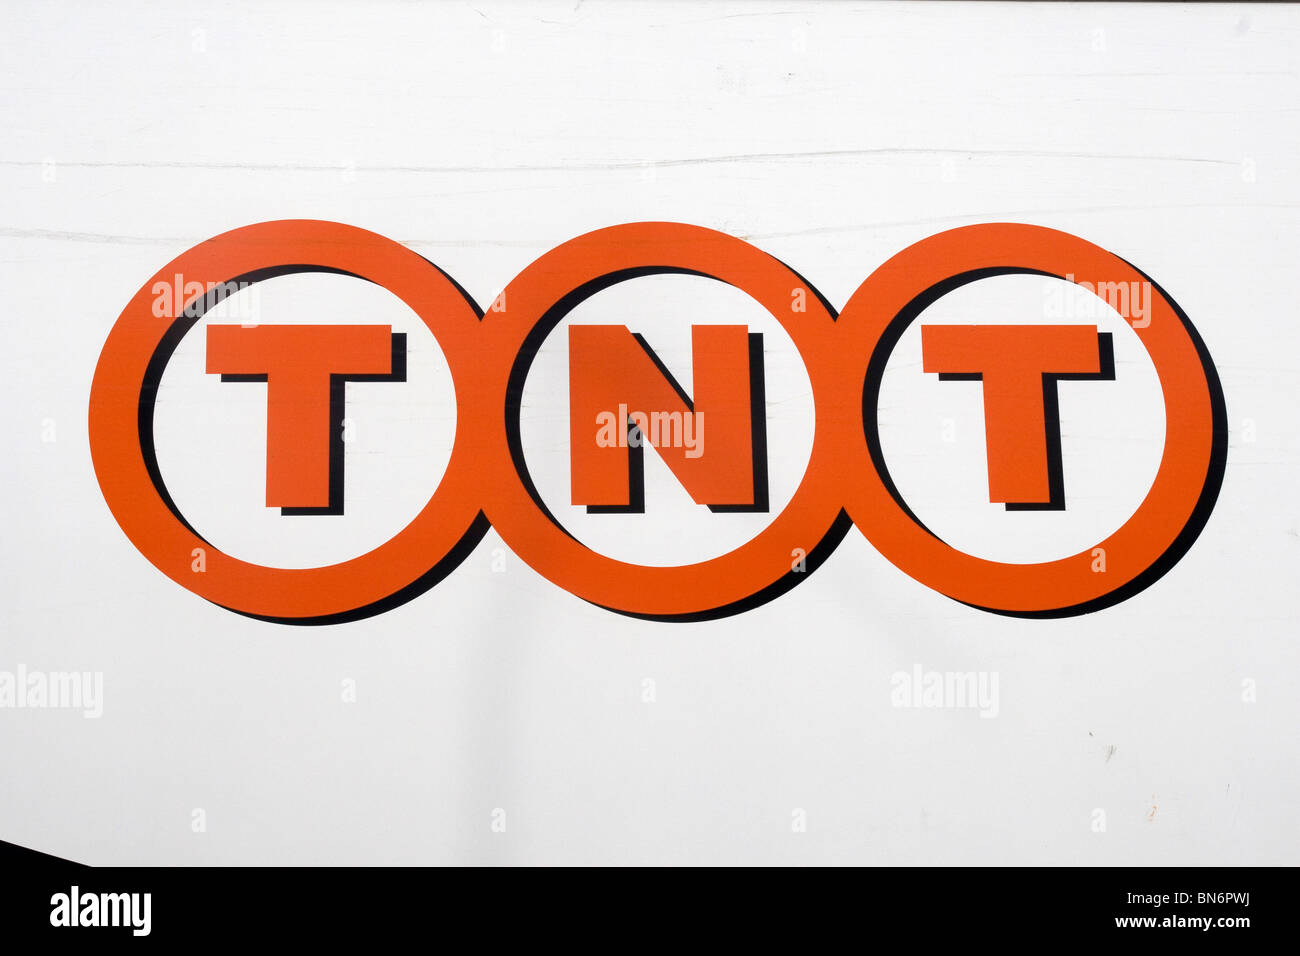 TNT Logo on side of delivery van Stock Photo